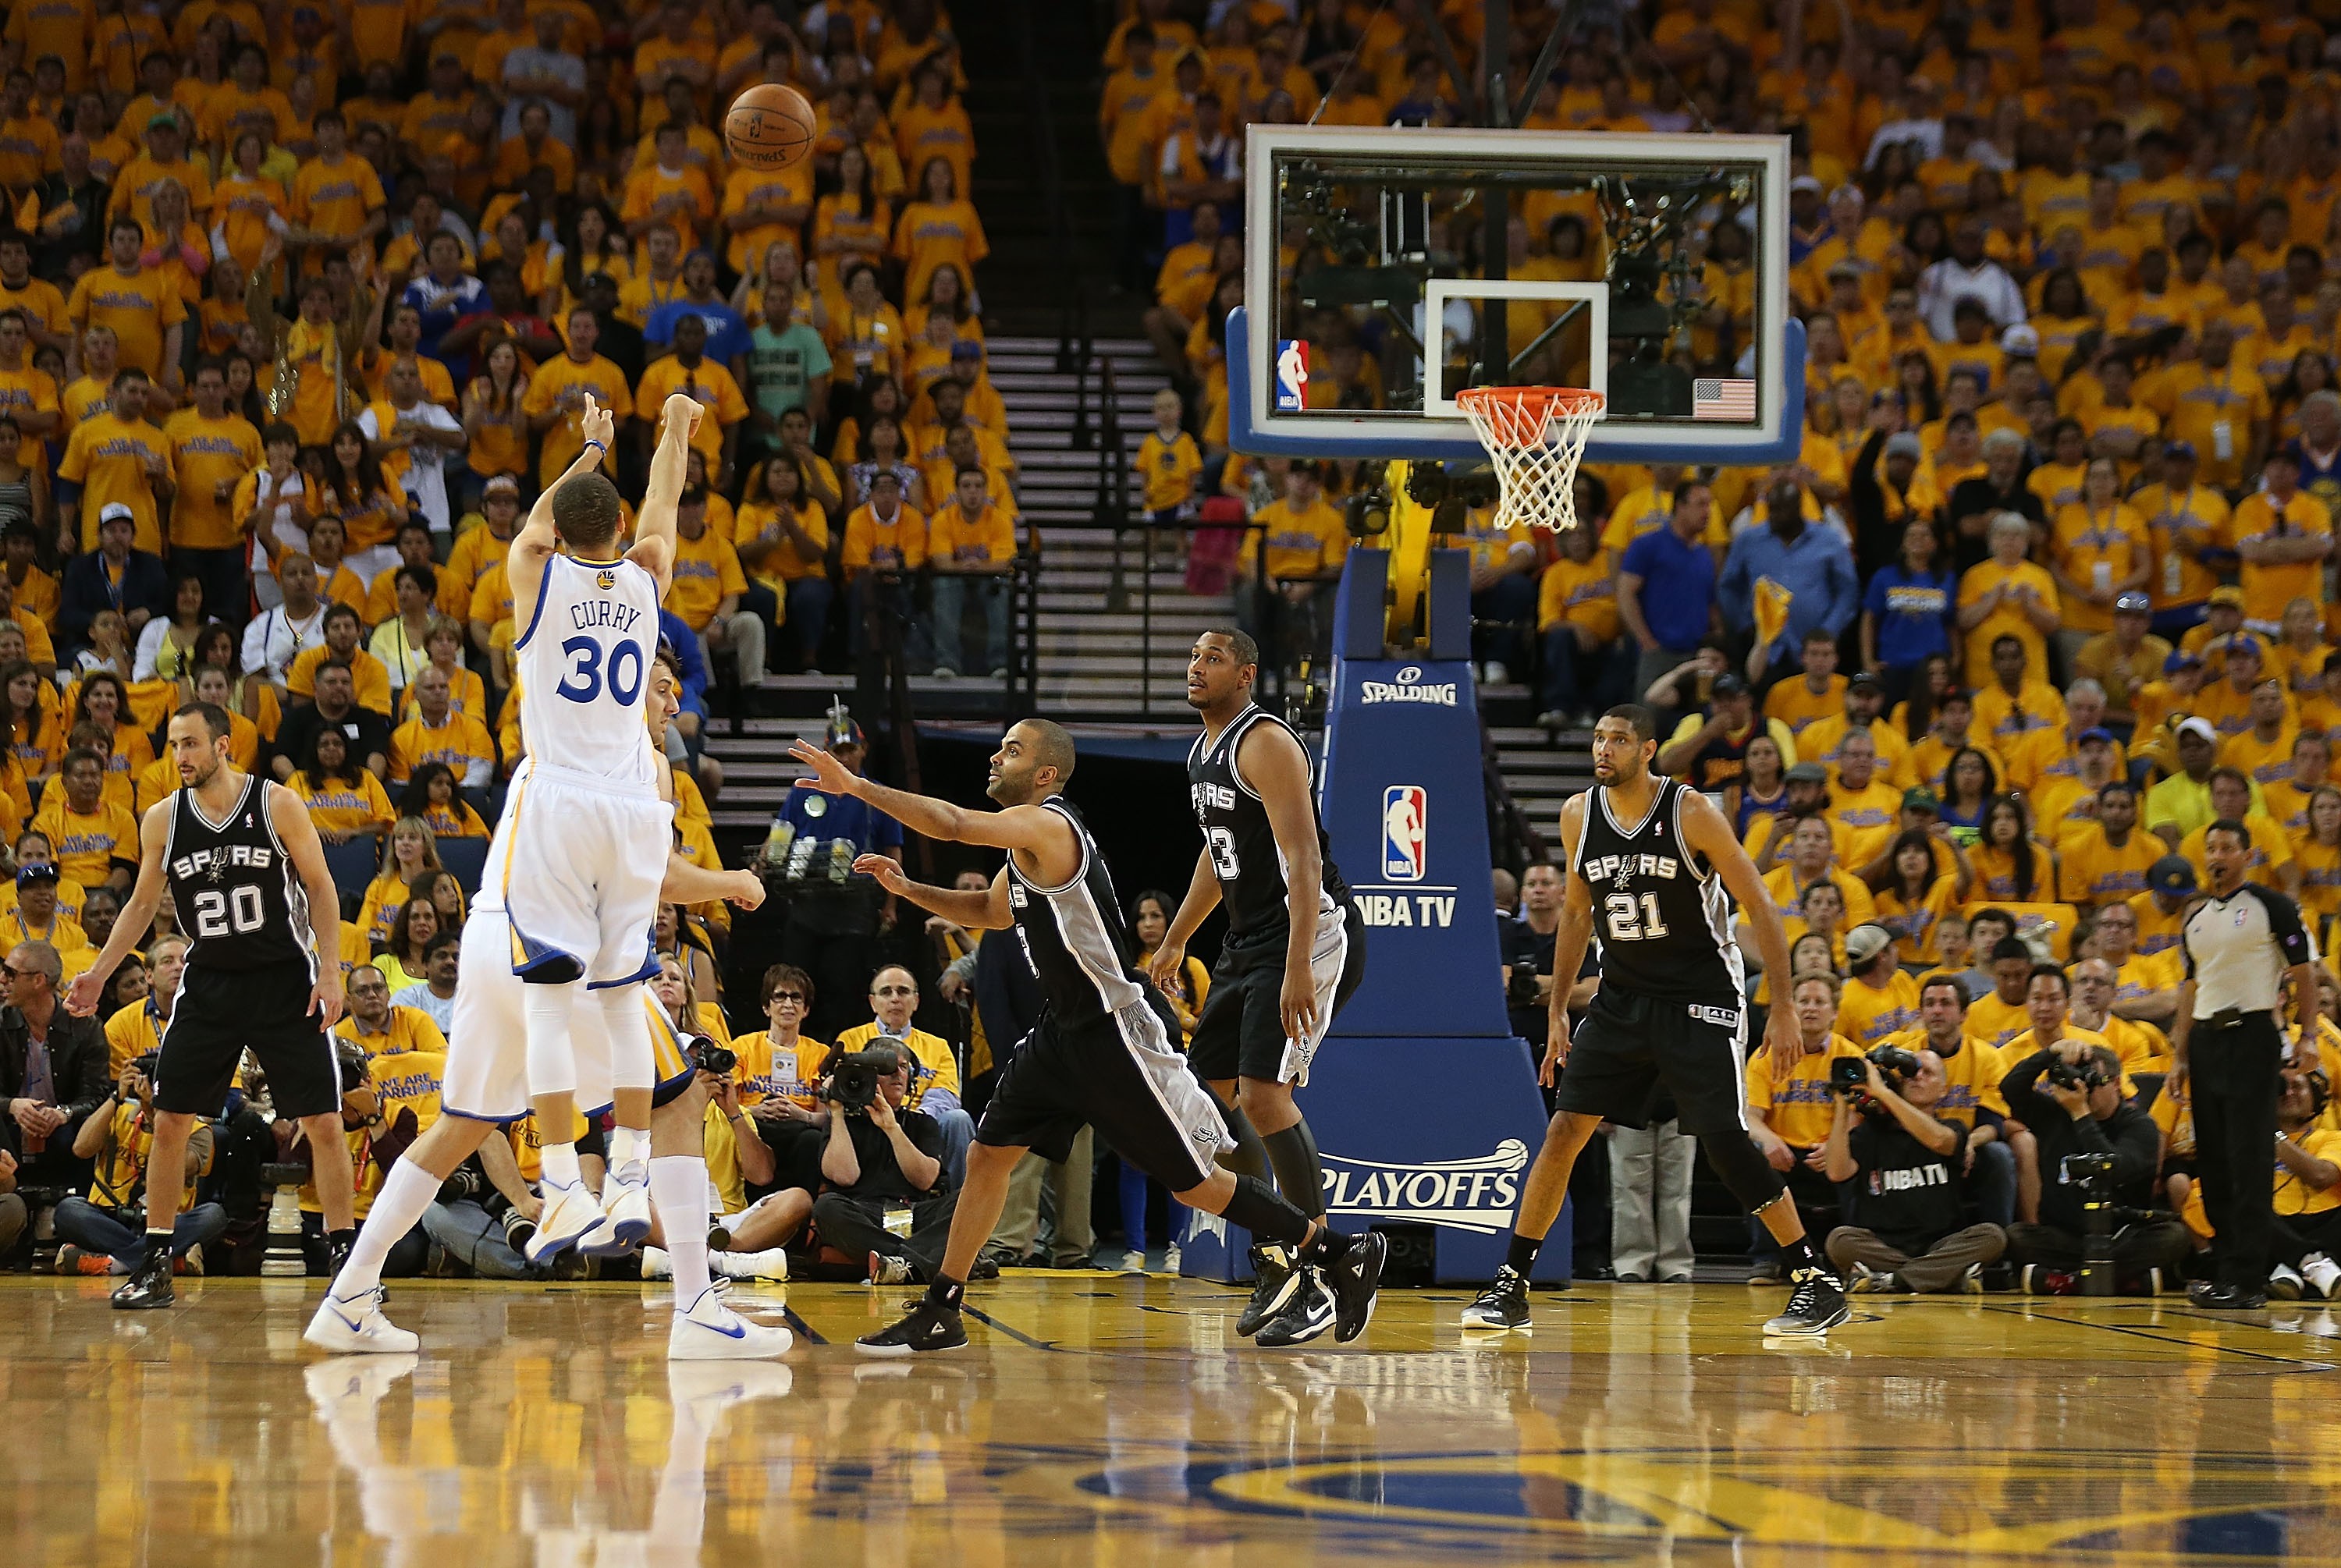 Stephen Curry S Run In The Playoffs Has Made Him A Folk Hero To